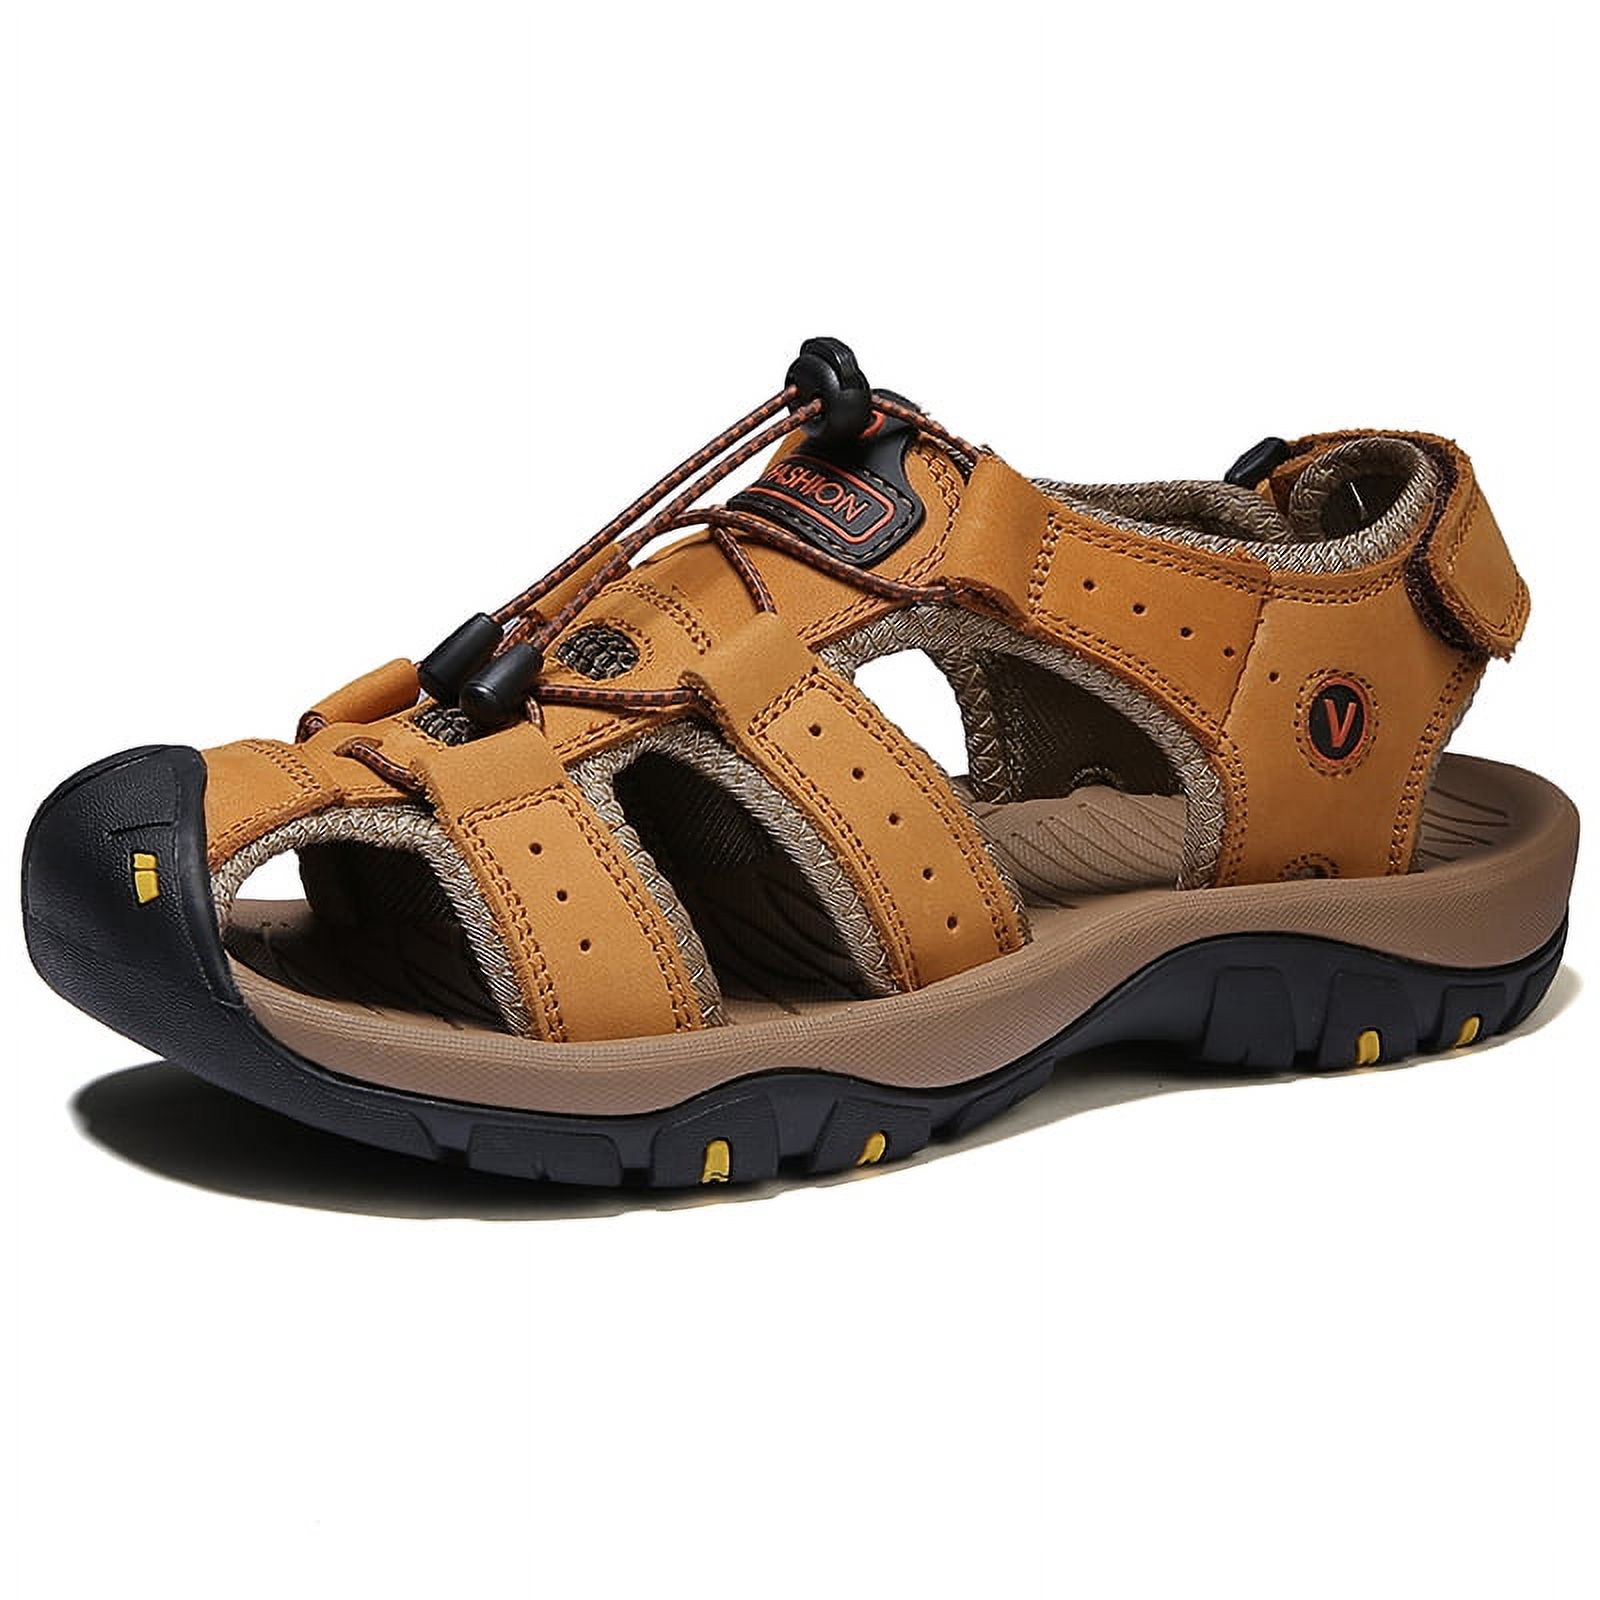 Men's Out Closed Toe Sandals, Comfy Beach Shoes, Spring And Summer ...